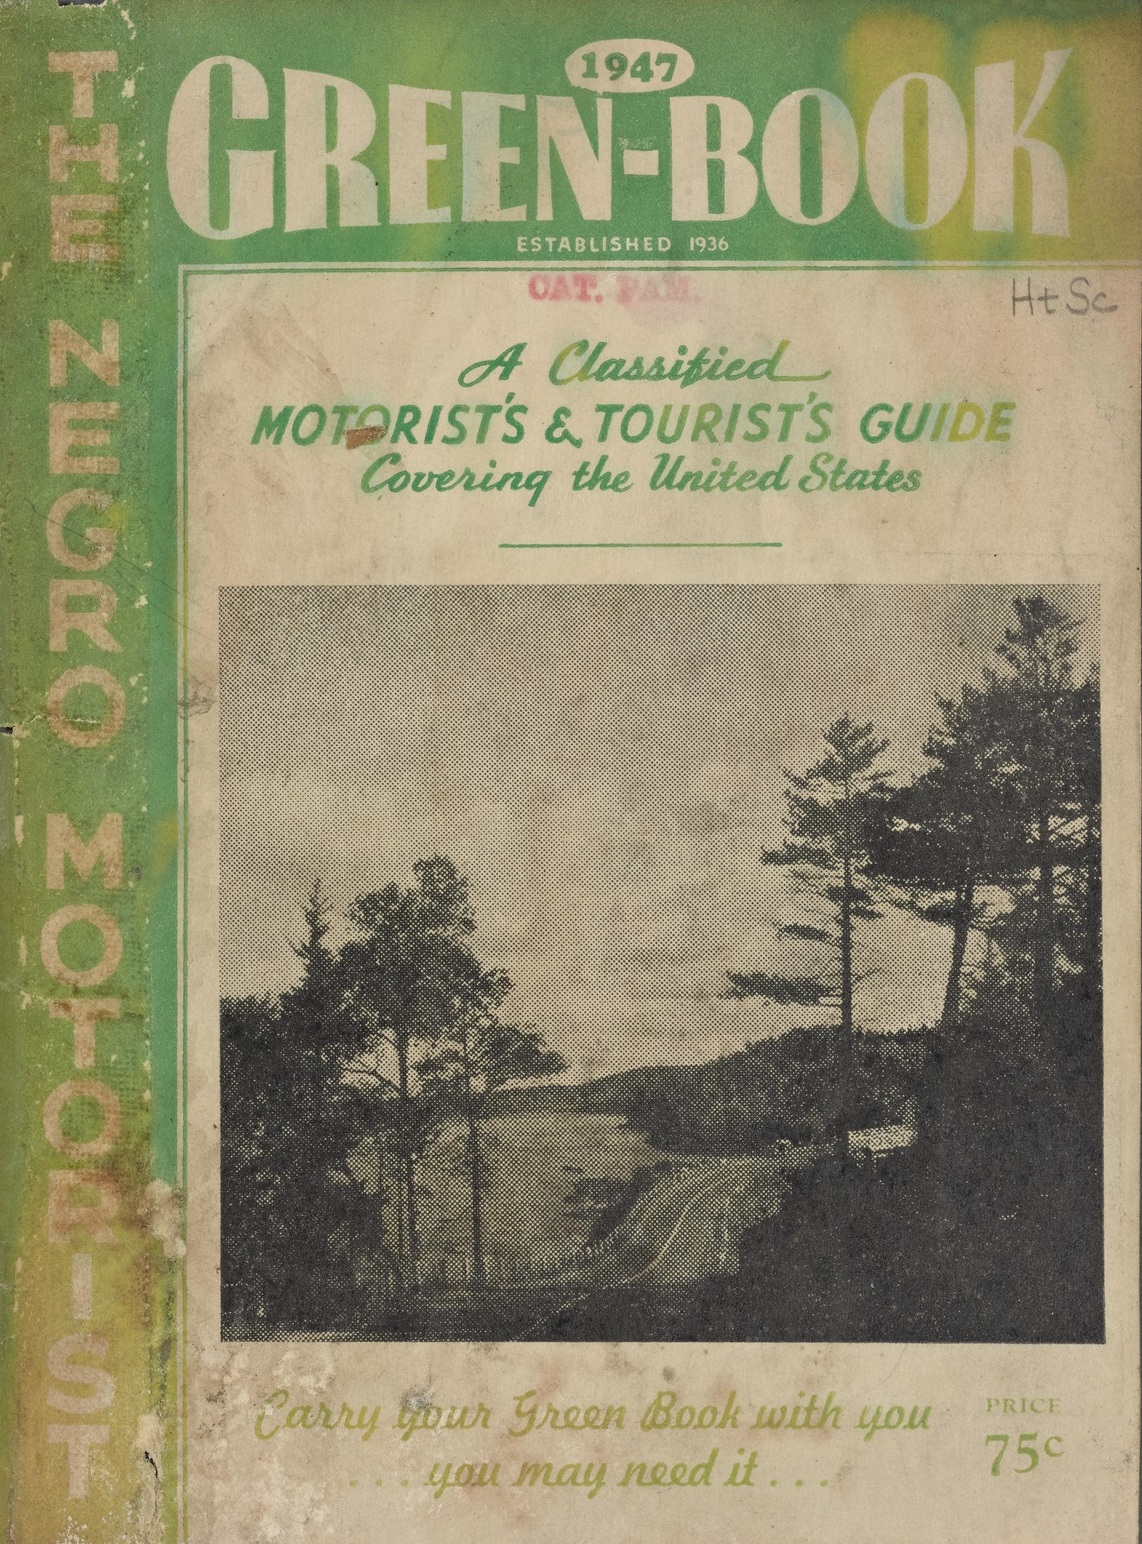 The Green Book cover, 1947. Courtesy Schomburg Center for Research in Black Culture, Jean Blackwell Hutson Research and Reference Division, New York Public Library.